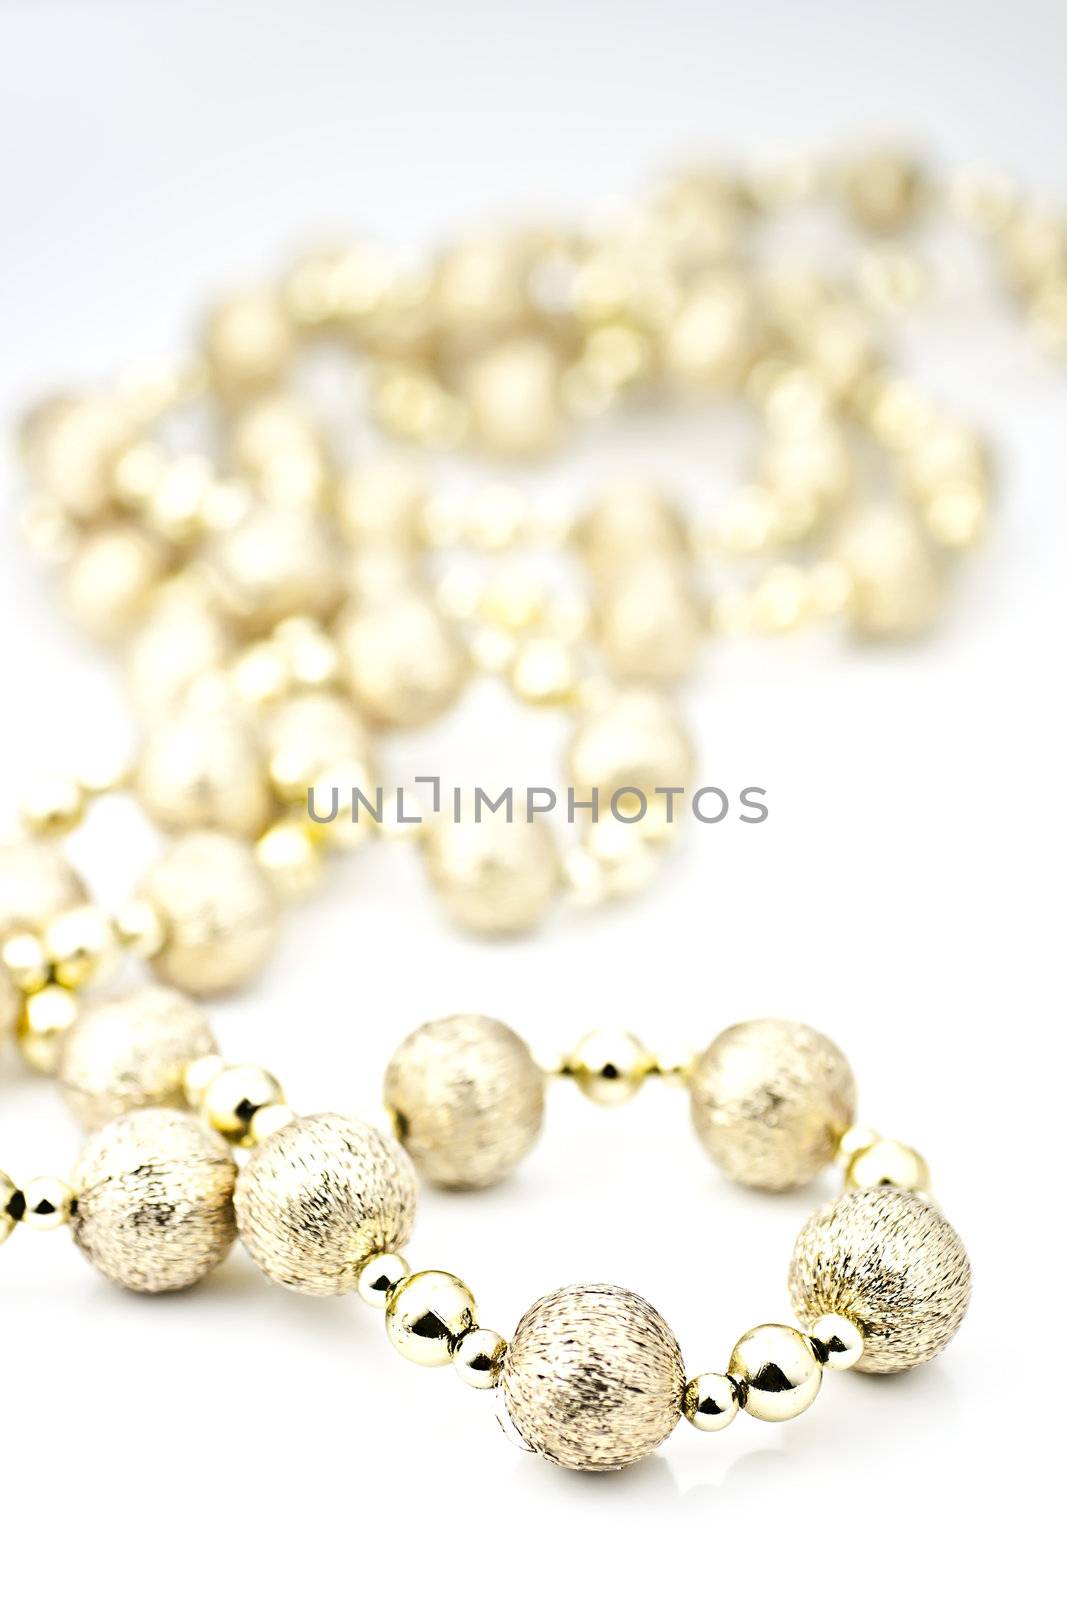 Decorative ball chains on the white background.
